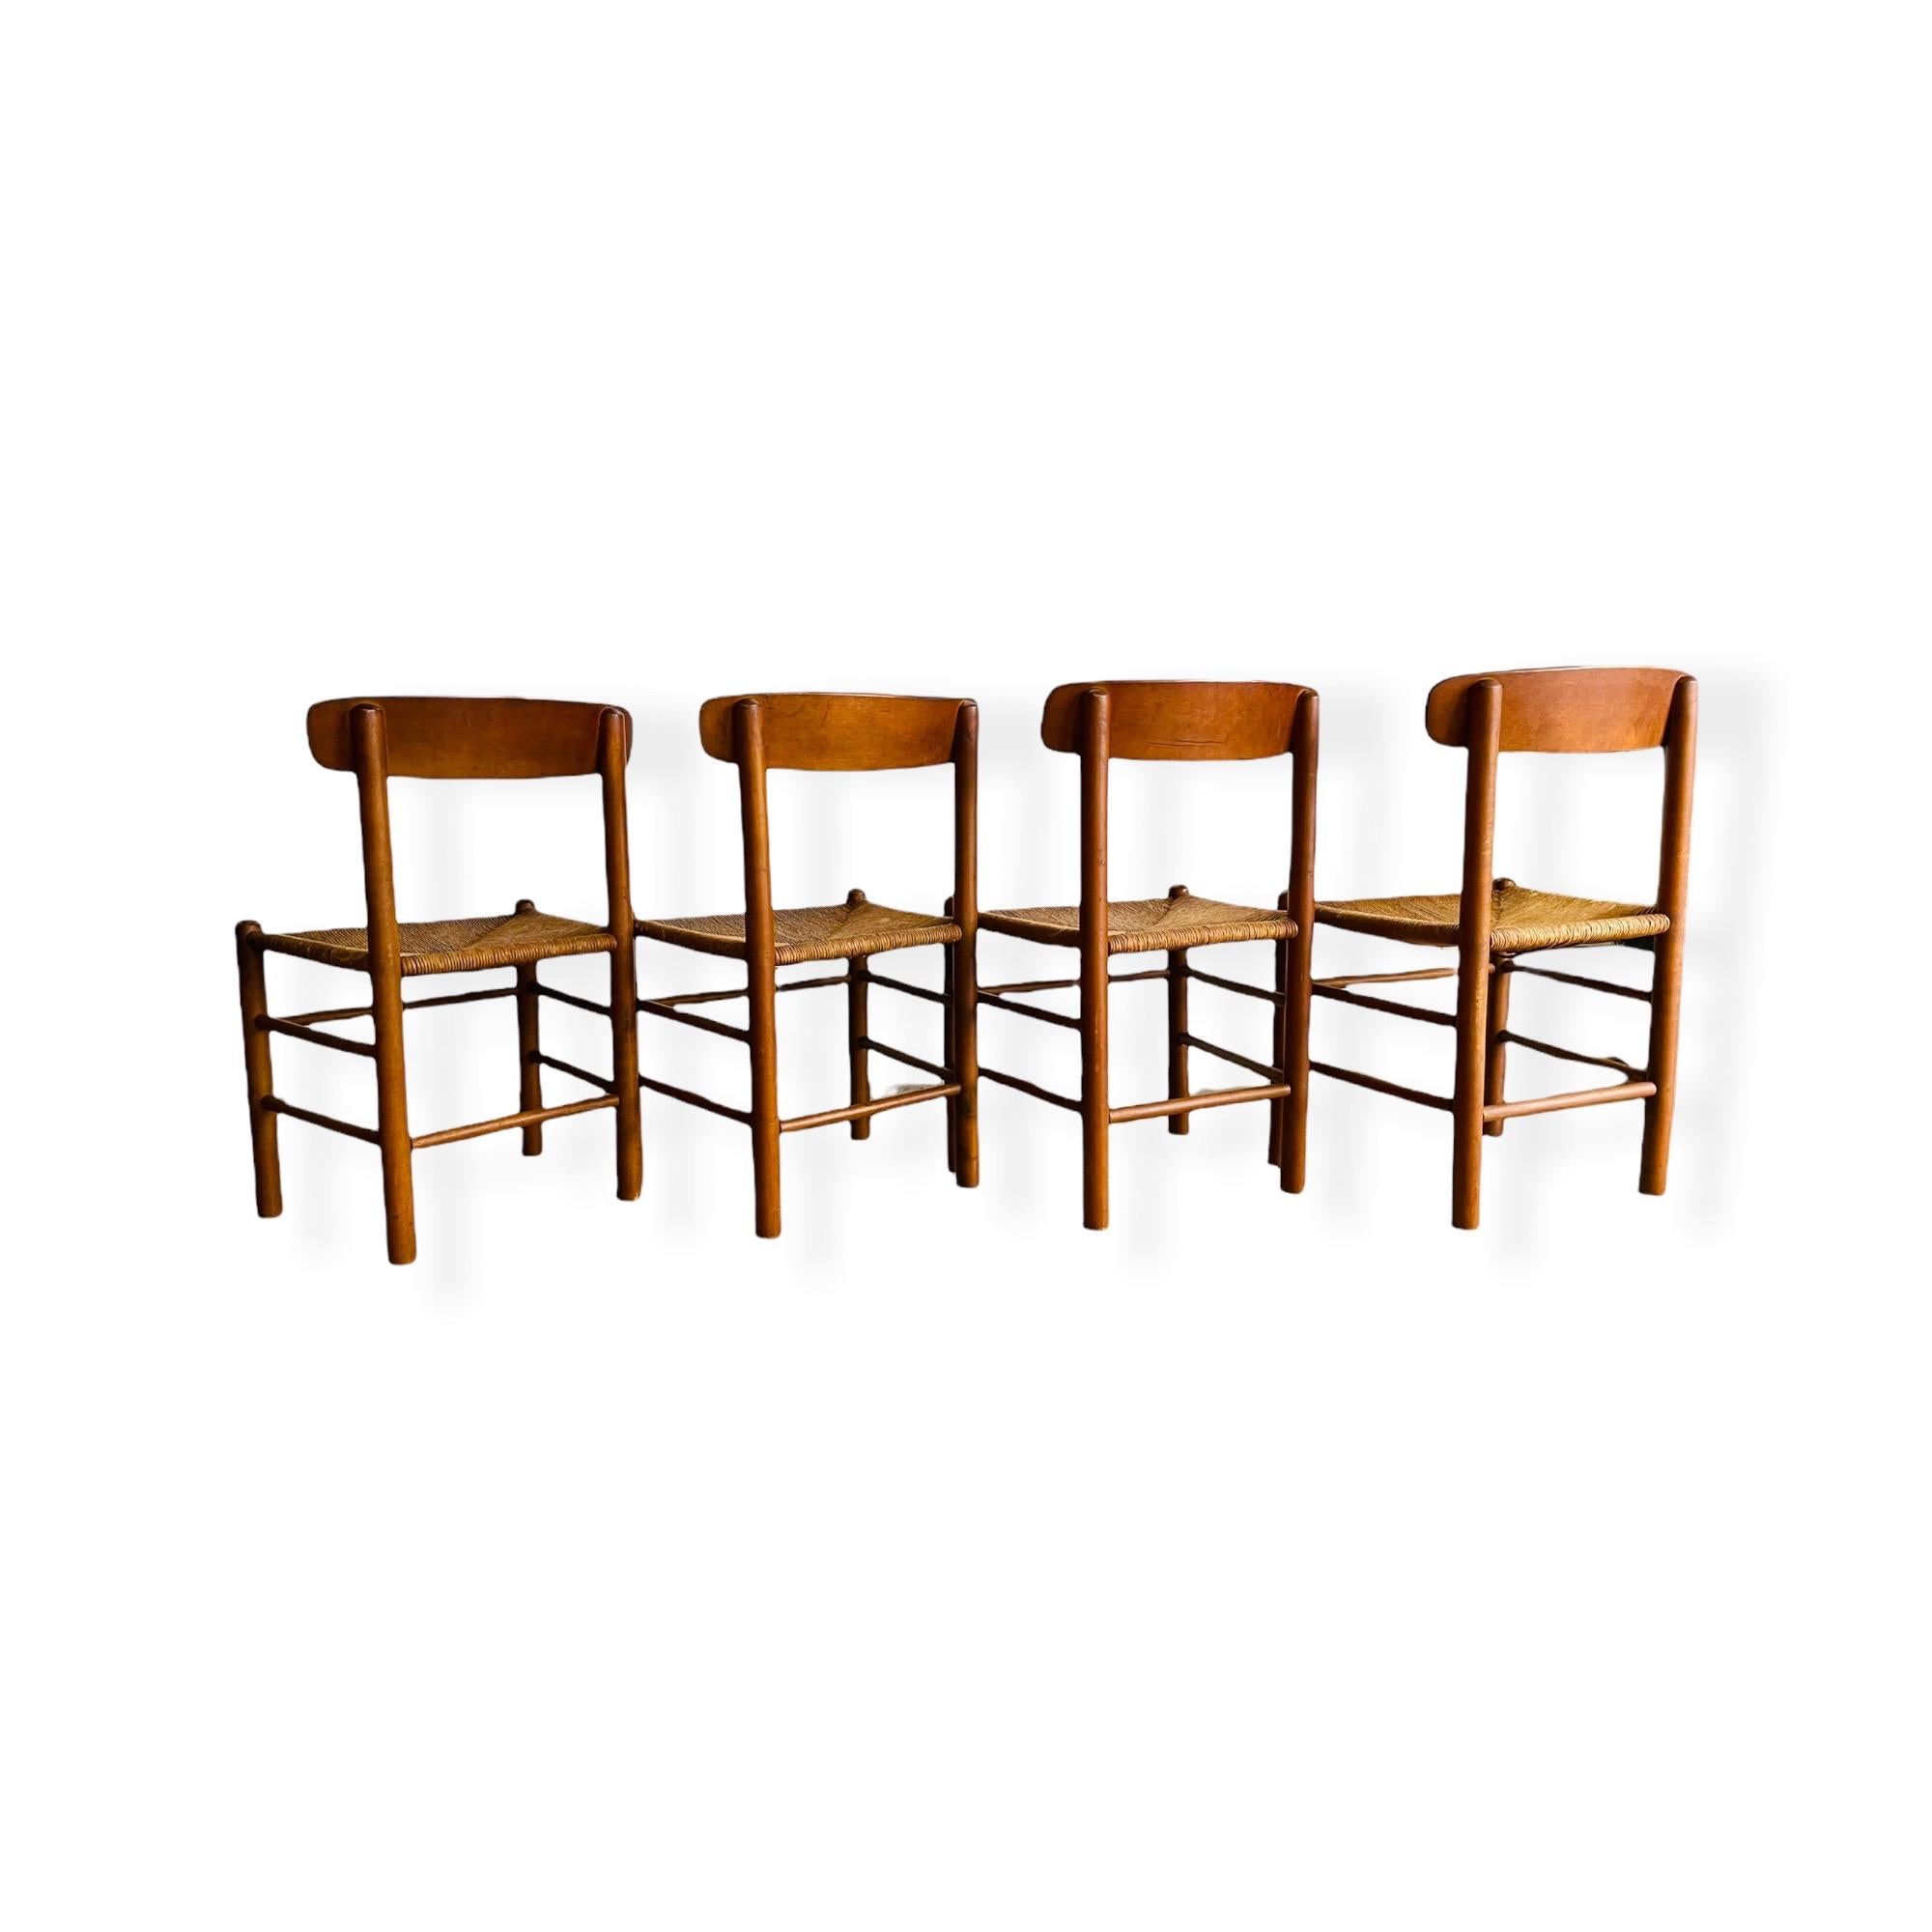 Here is a beautiful set 4 Danish modern paper cord chairs by Børge Morgensen for FDB Møbler model ‘J39’ circa 1947. This chairs are in great vintage condition with normal wear consistent with age and use.

Measures: W 19” x D 15.5” x H 31” x SH